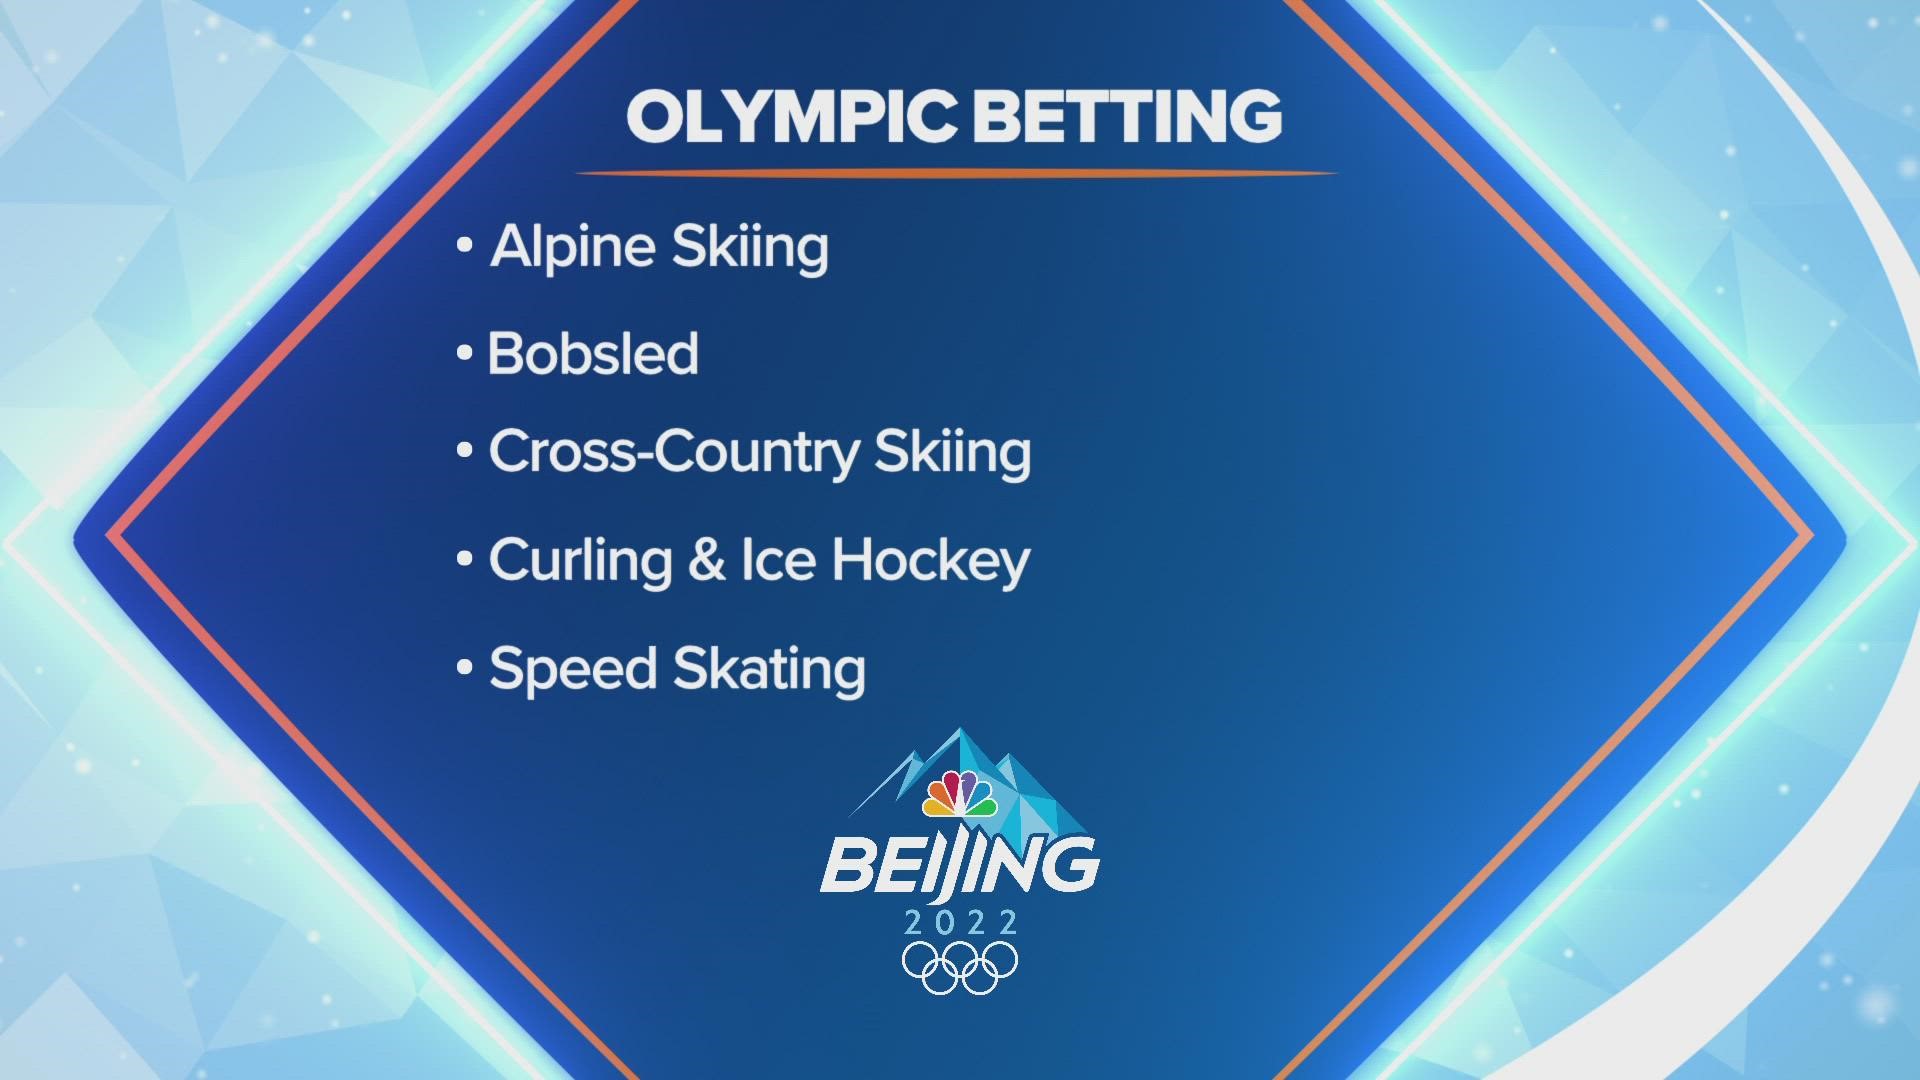 If you're planning to place a bet, keep in mind that many Olympic events will have happened well before they make it on air in the United States.